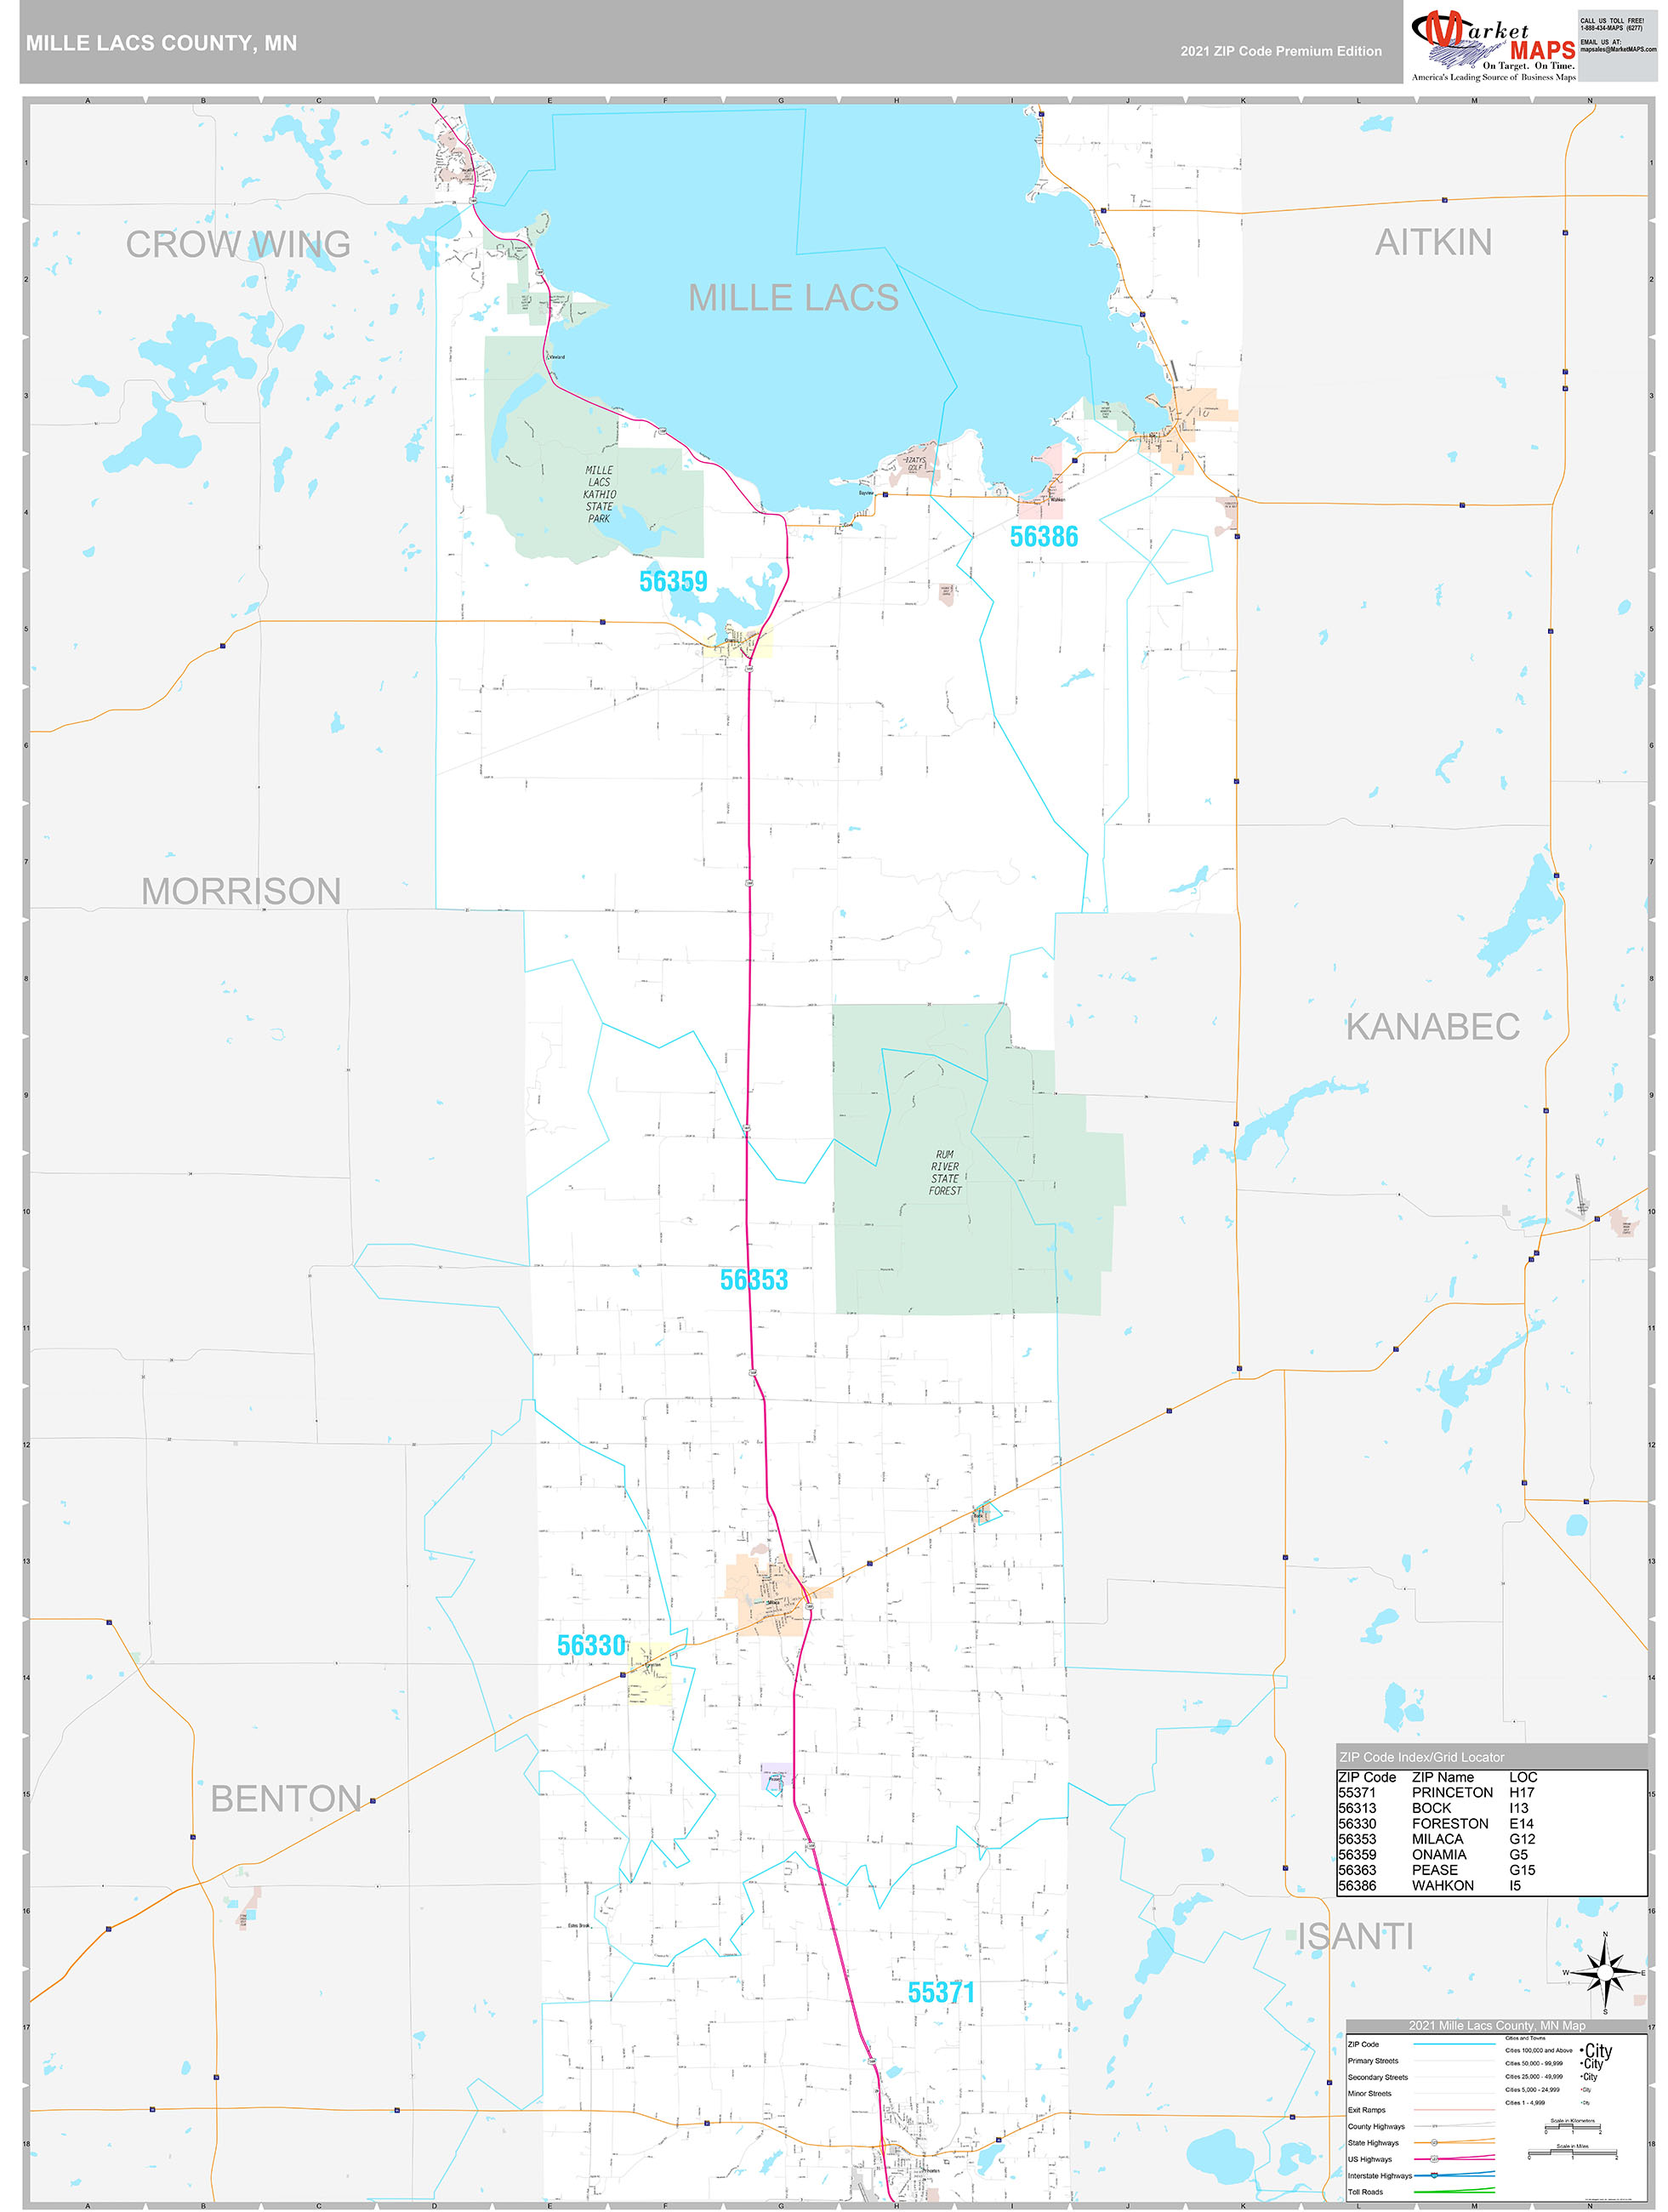 Mille Lacs County, MN Wall Map Premium Style by MarketMAPS